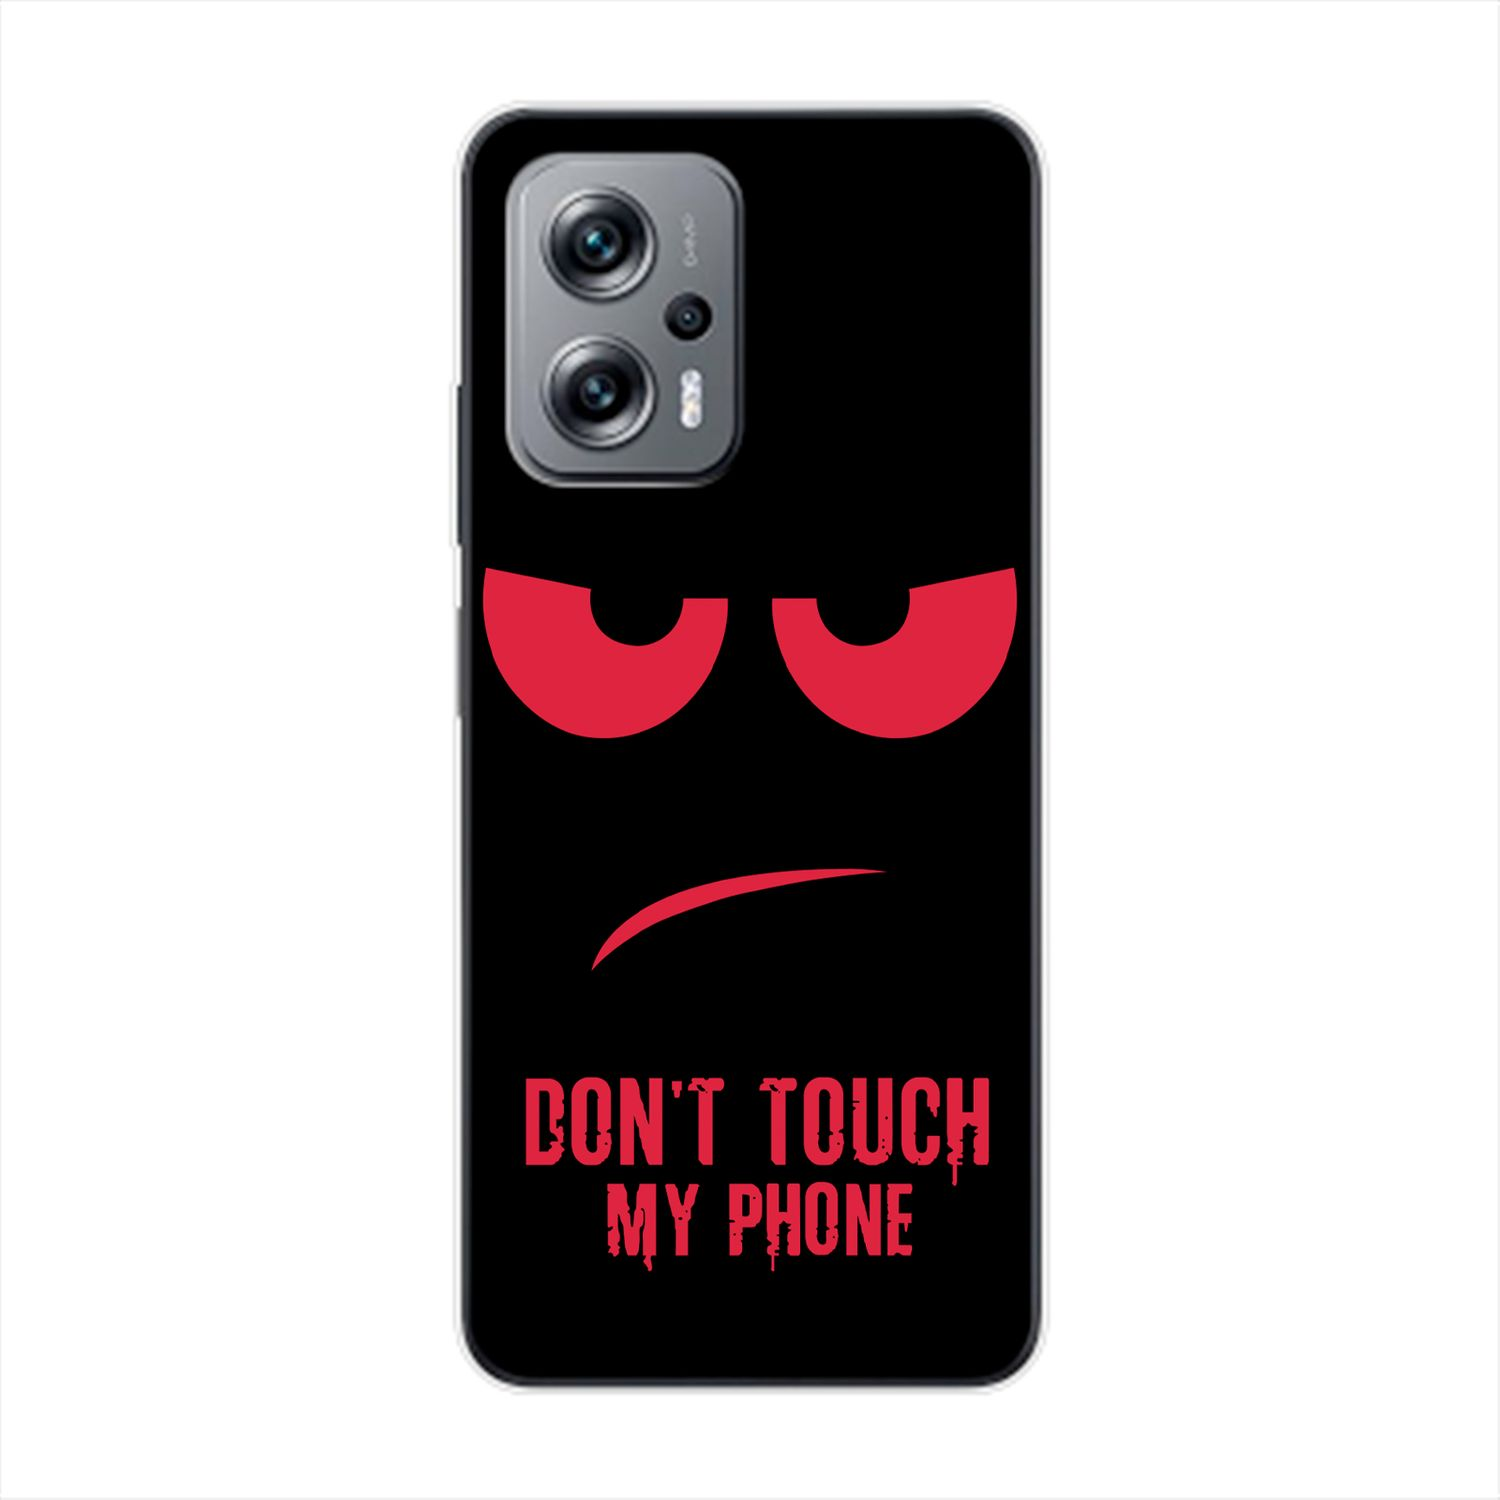 Backcover, Redmi DESIGN Touch KÖNIG Phone K50i, Case, My Dont Xiaomi, Rot